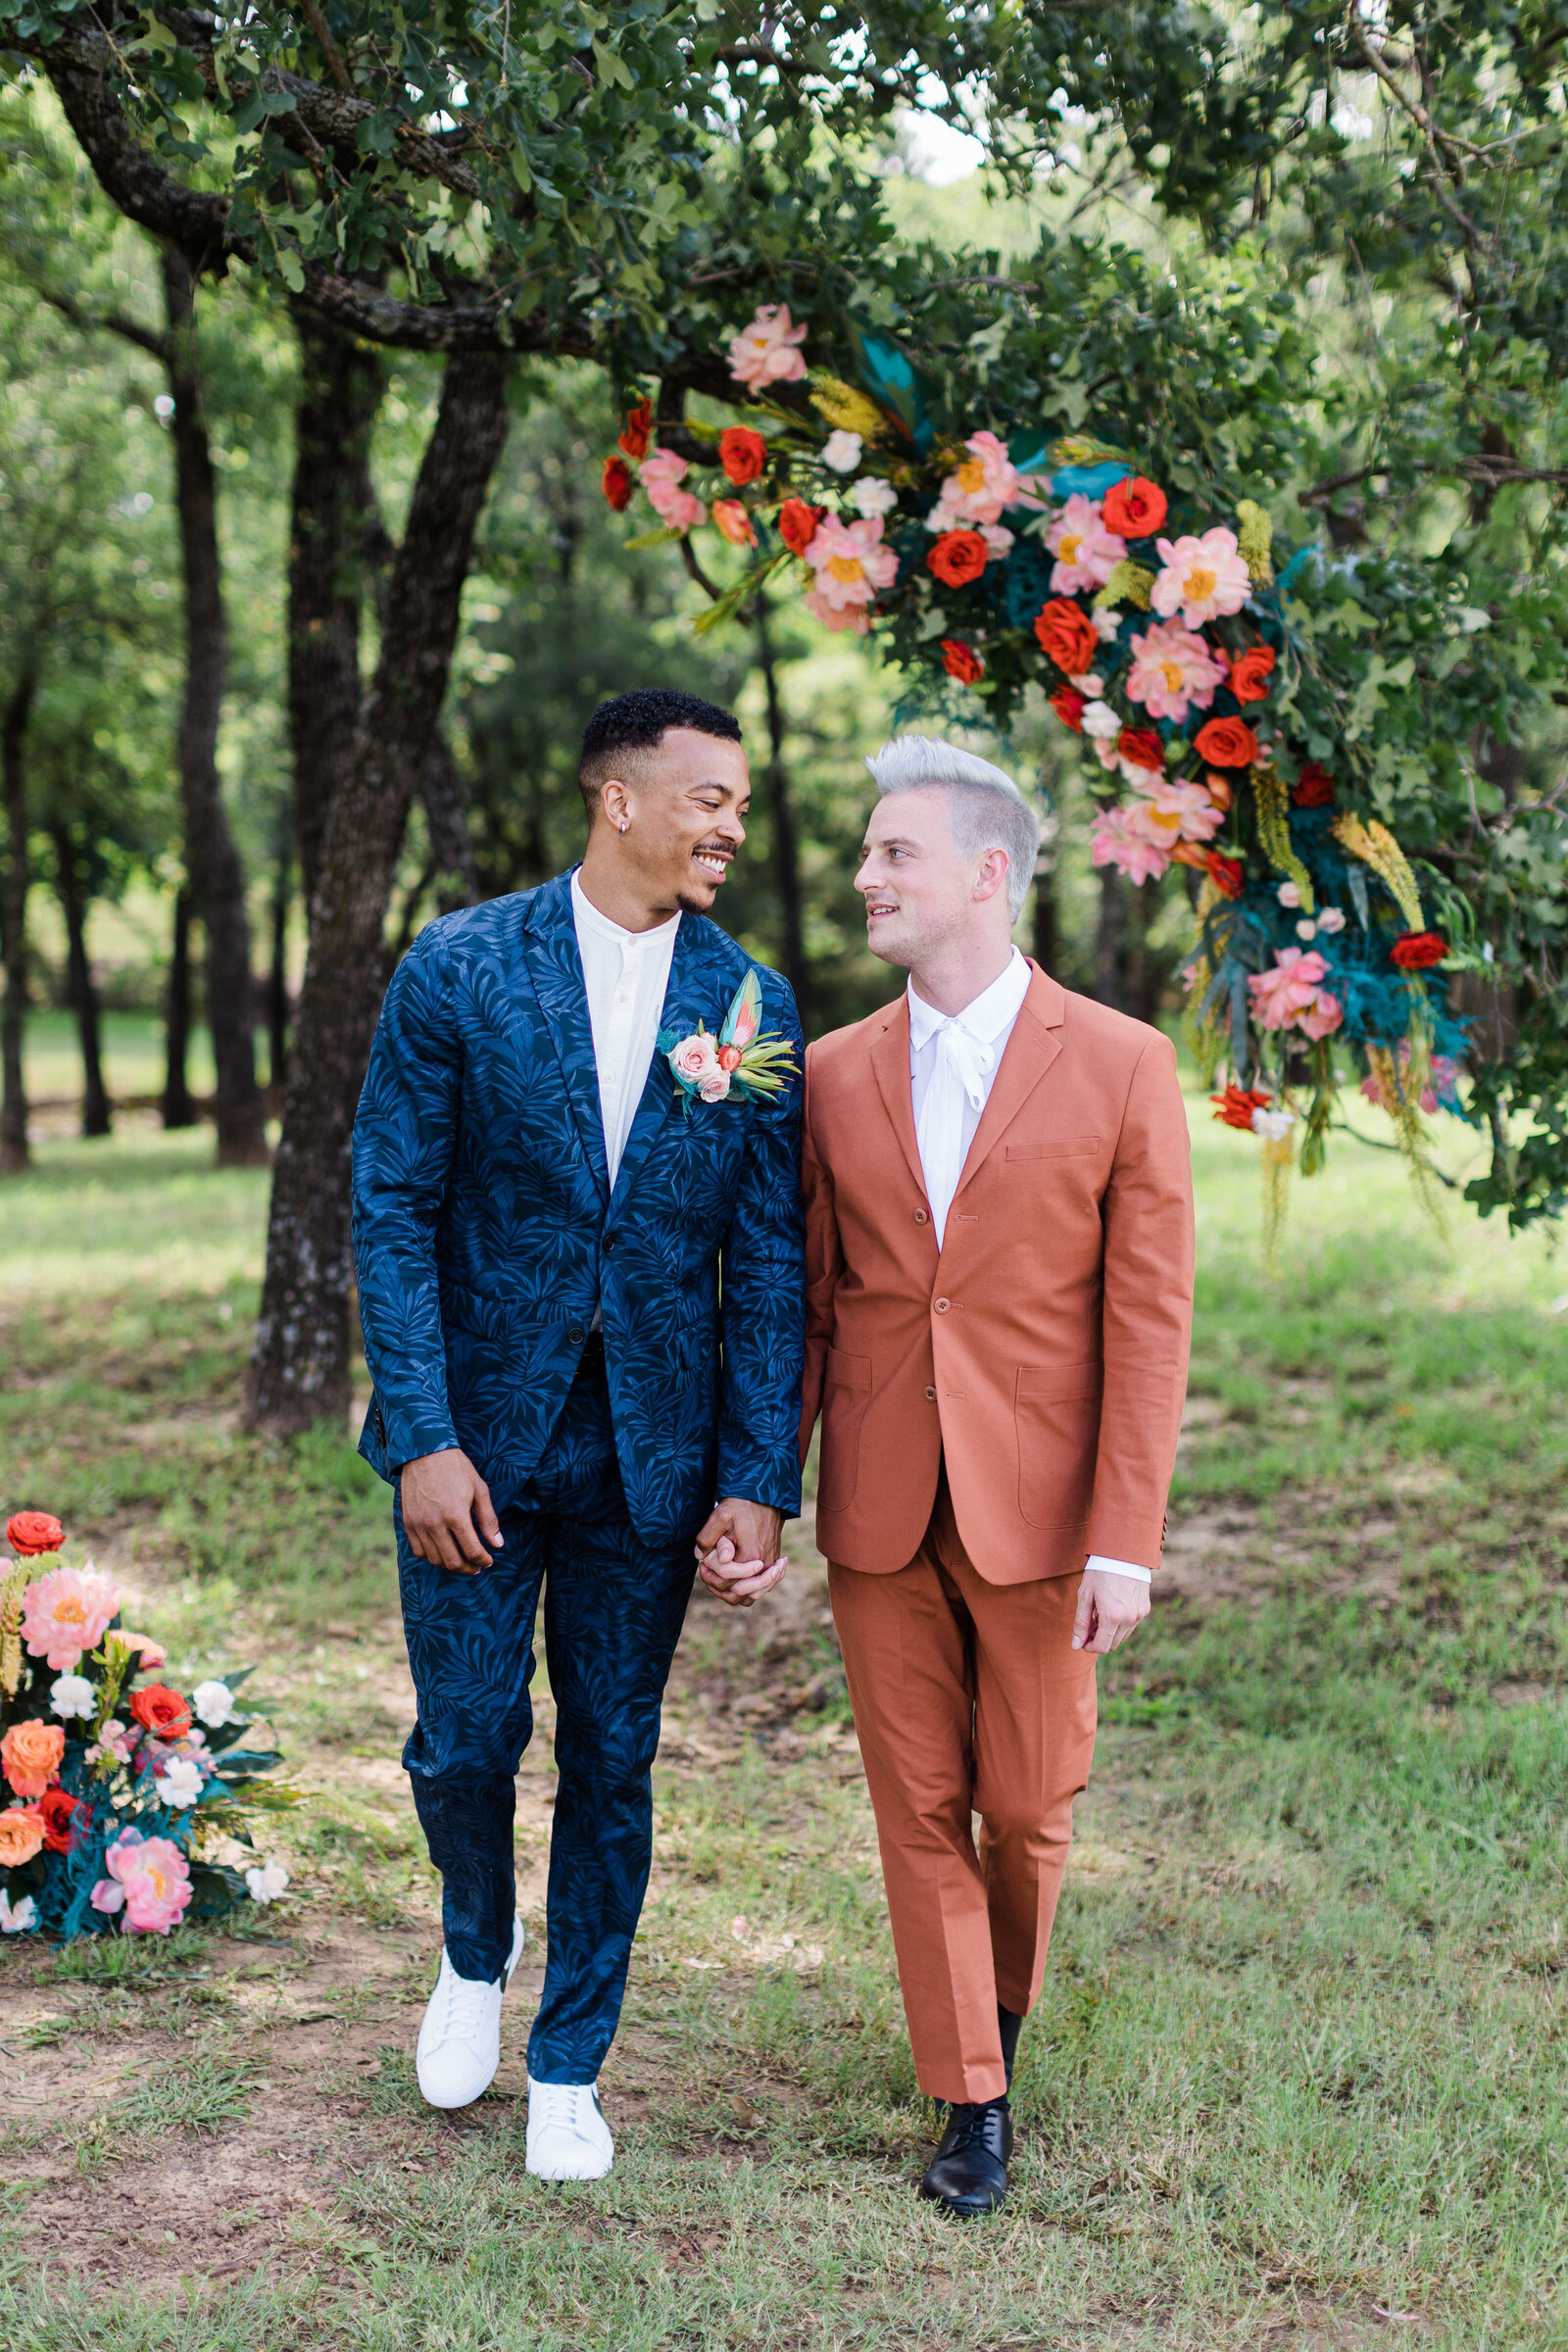 Two grooms walking together while holding hands and looking into each other's eyes at Bella Cavalli Events in Aubrey, Texas. They are surrounded by many trees and some large, colorful floral arrangements. The African American groom on the left is wearing a blue, floral suit and boutonniere. The Caucasian groom is on the right and is wearing a reddish orange suit.